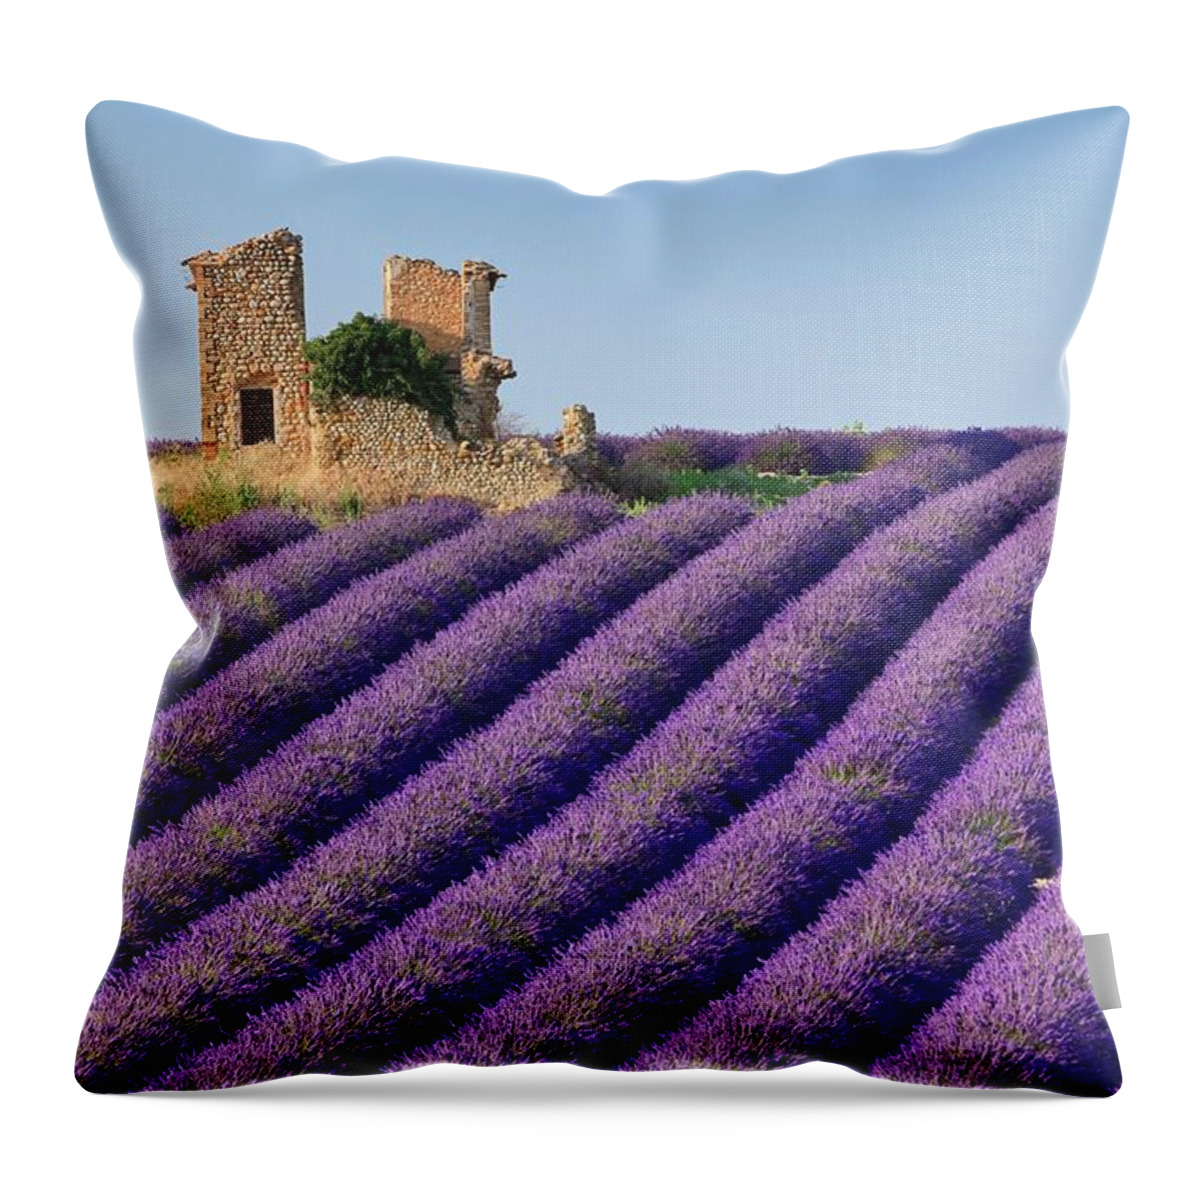 Estock Throw Pillow featuring the digital art France, Provence-alpes-cote D'azur, Provence, Valensole, Lavender Field With Old Ruin Near Valensole by Luigi Vaccarella